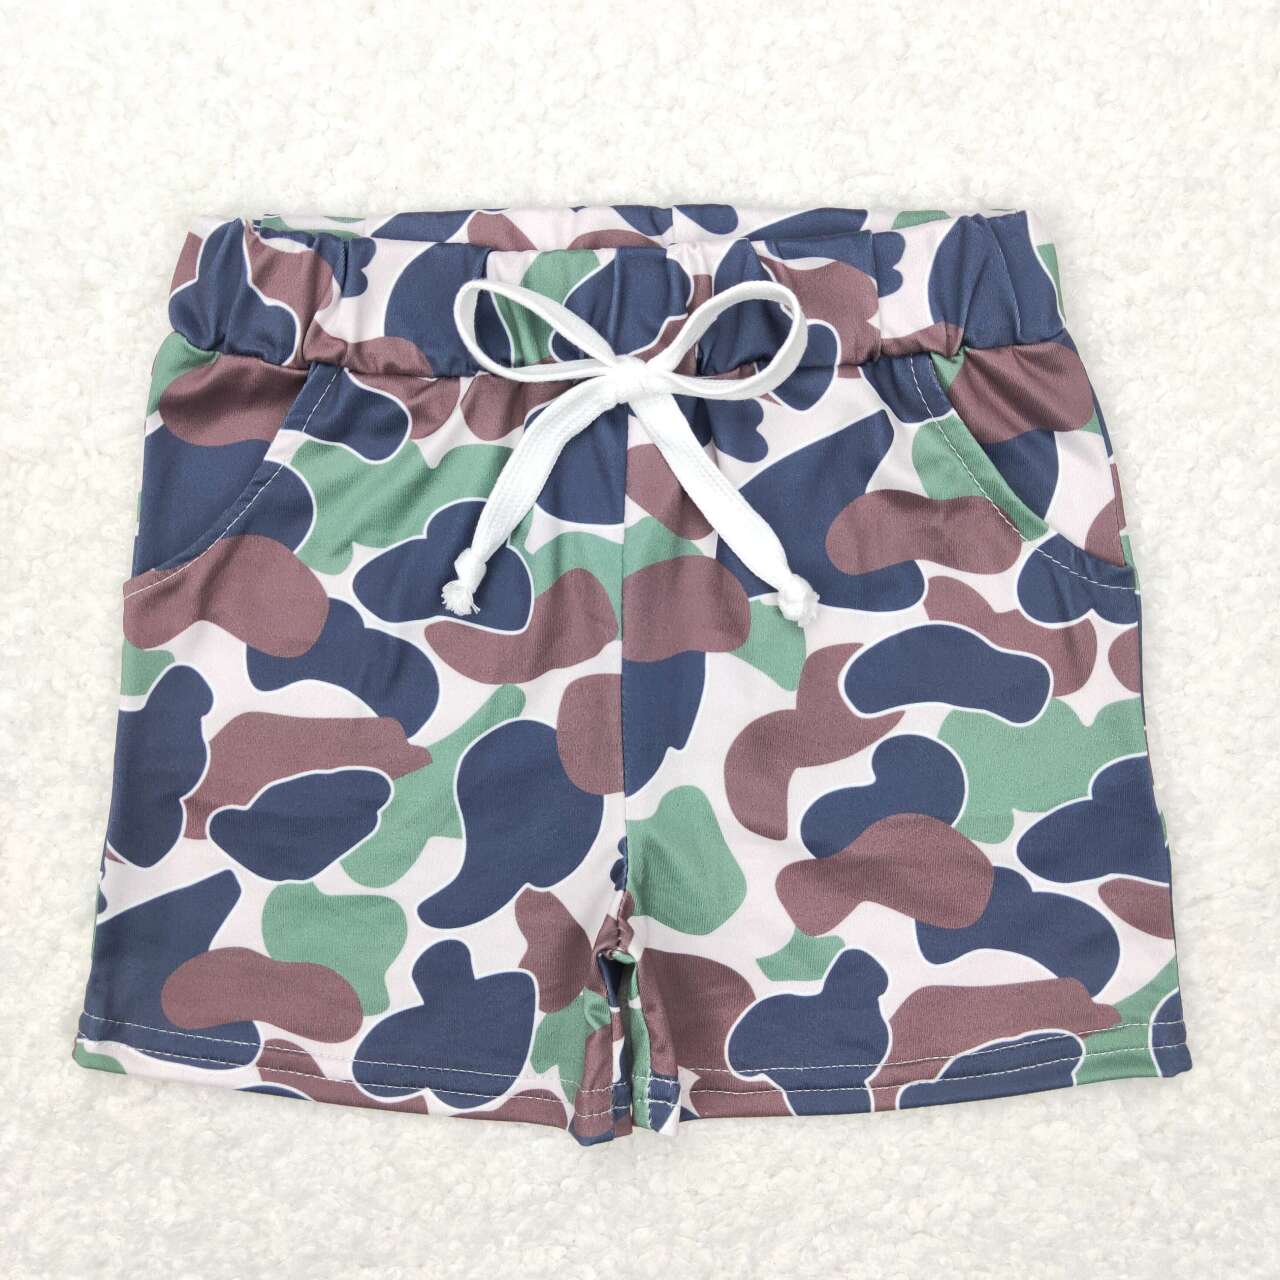 BT0443 Embroidered camouflage cross green short-sleeved top+SS0138 camo pocket shorts